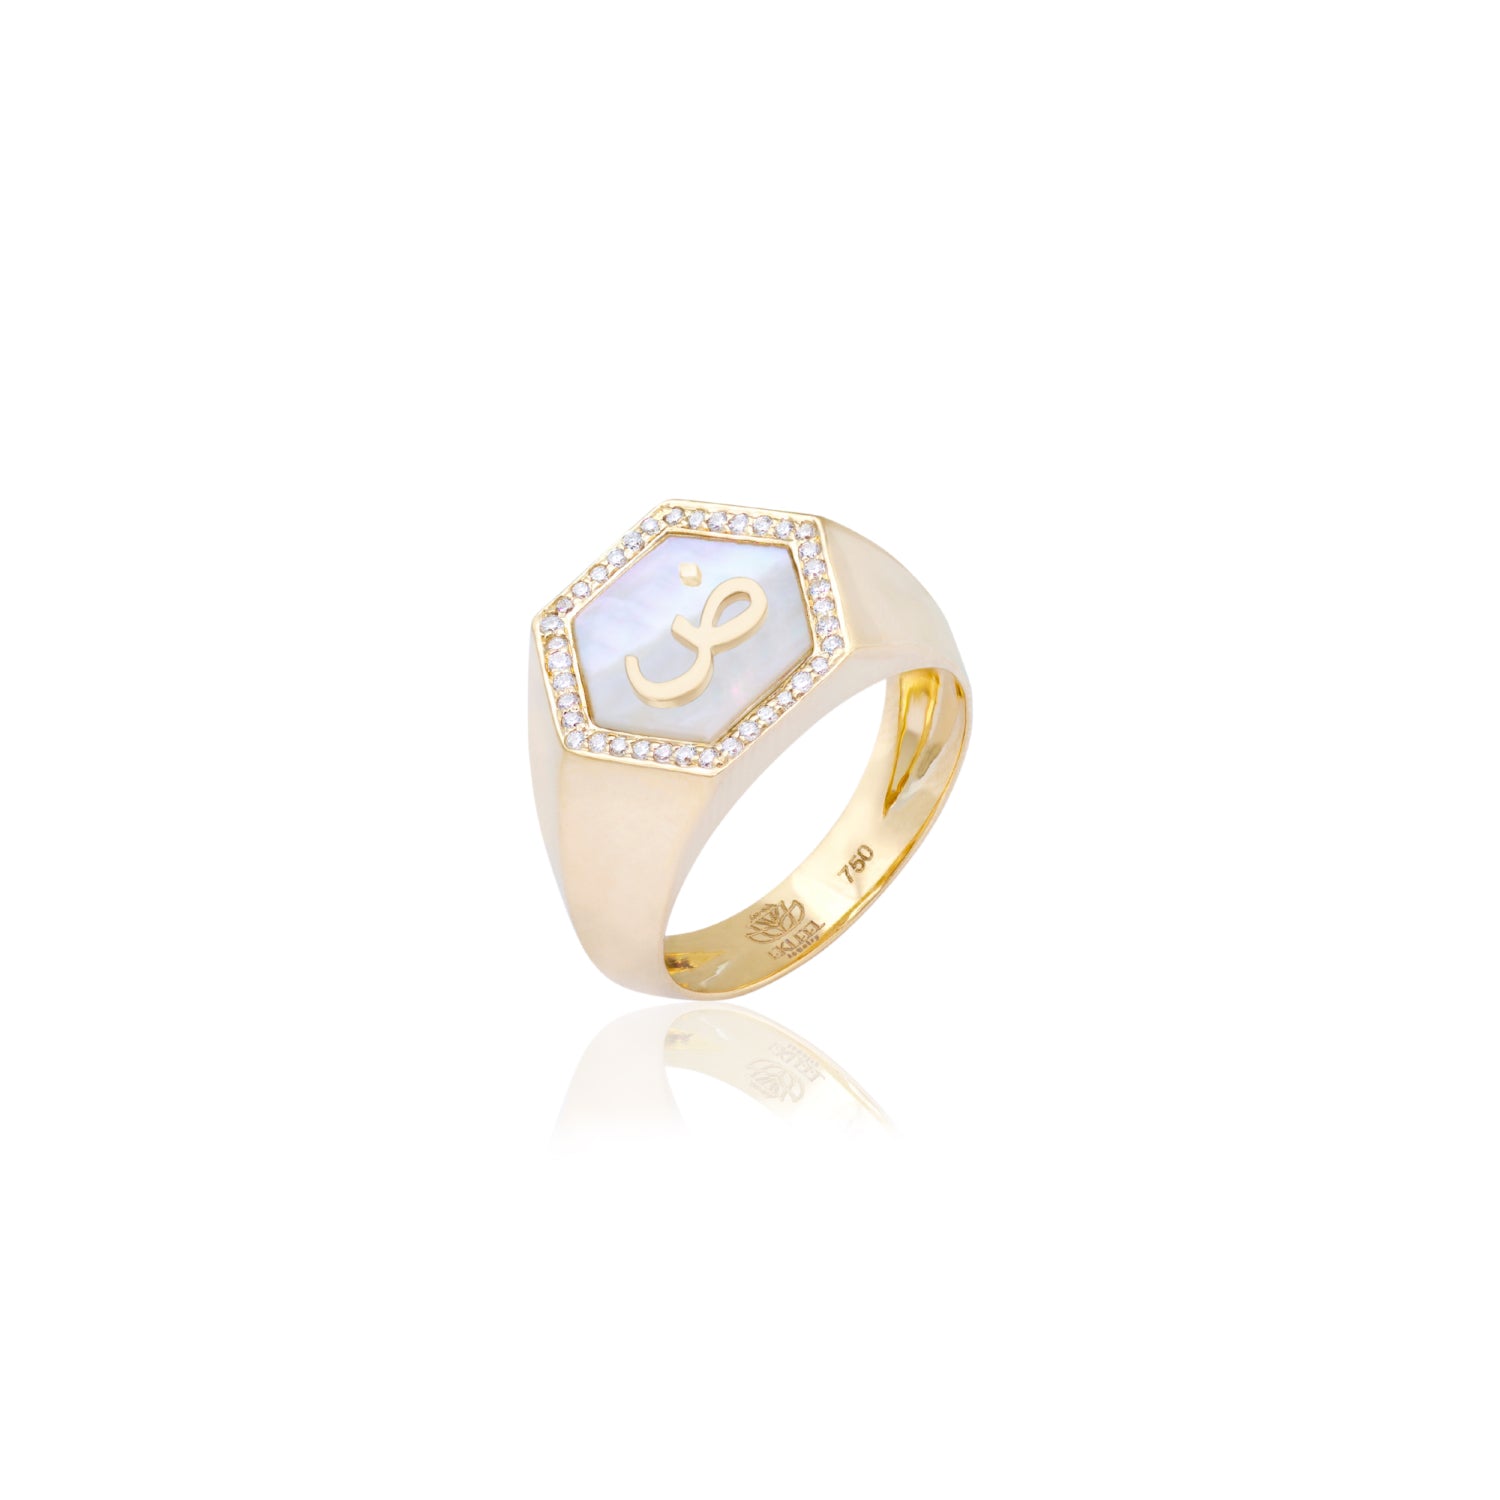 Qamoos 2.0 Letter ض White Mother of Pearl and Diamond Signet Ring in Yellow Gold